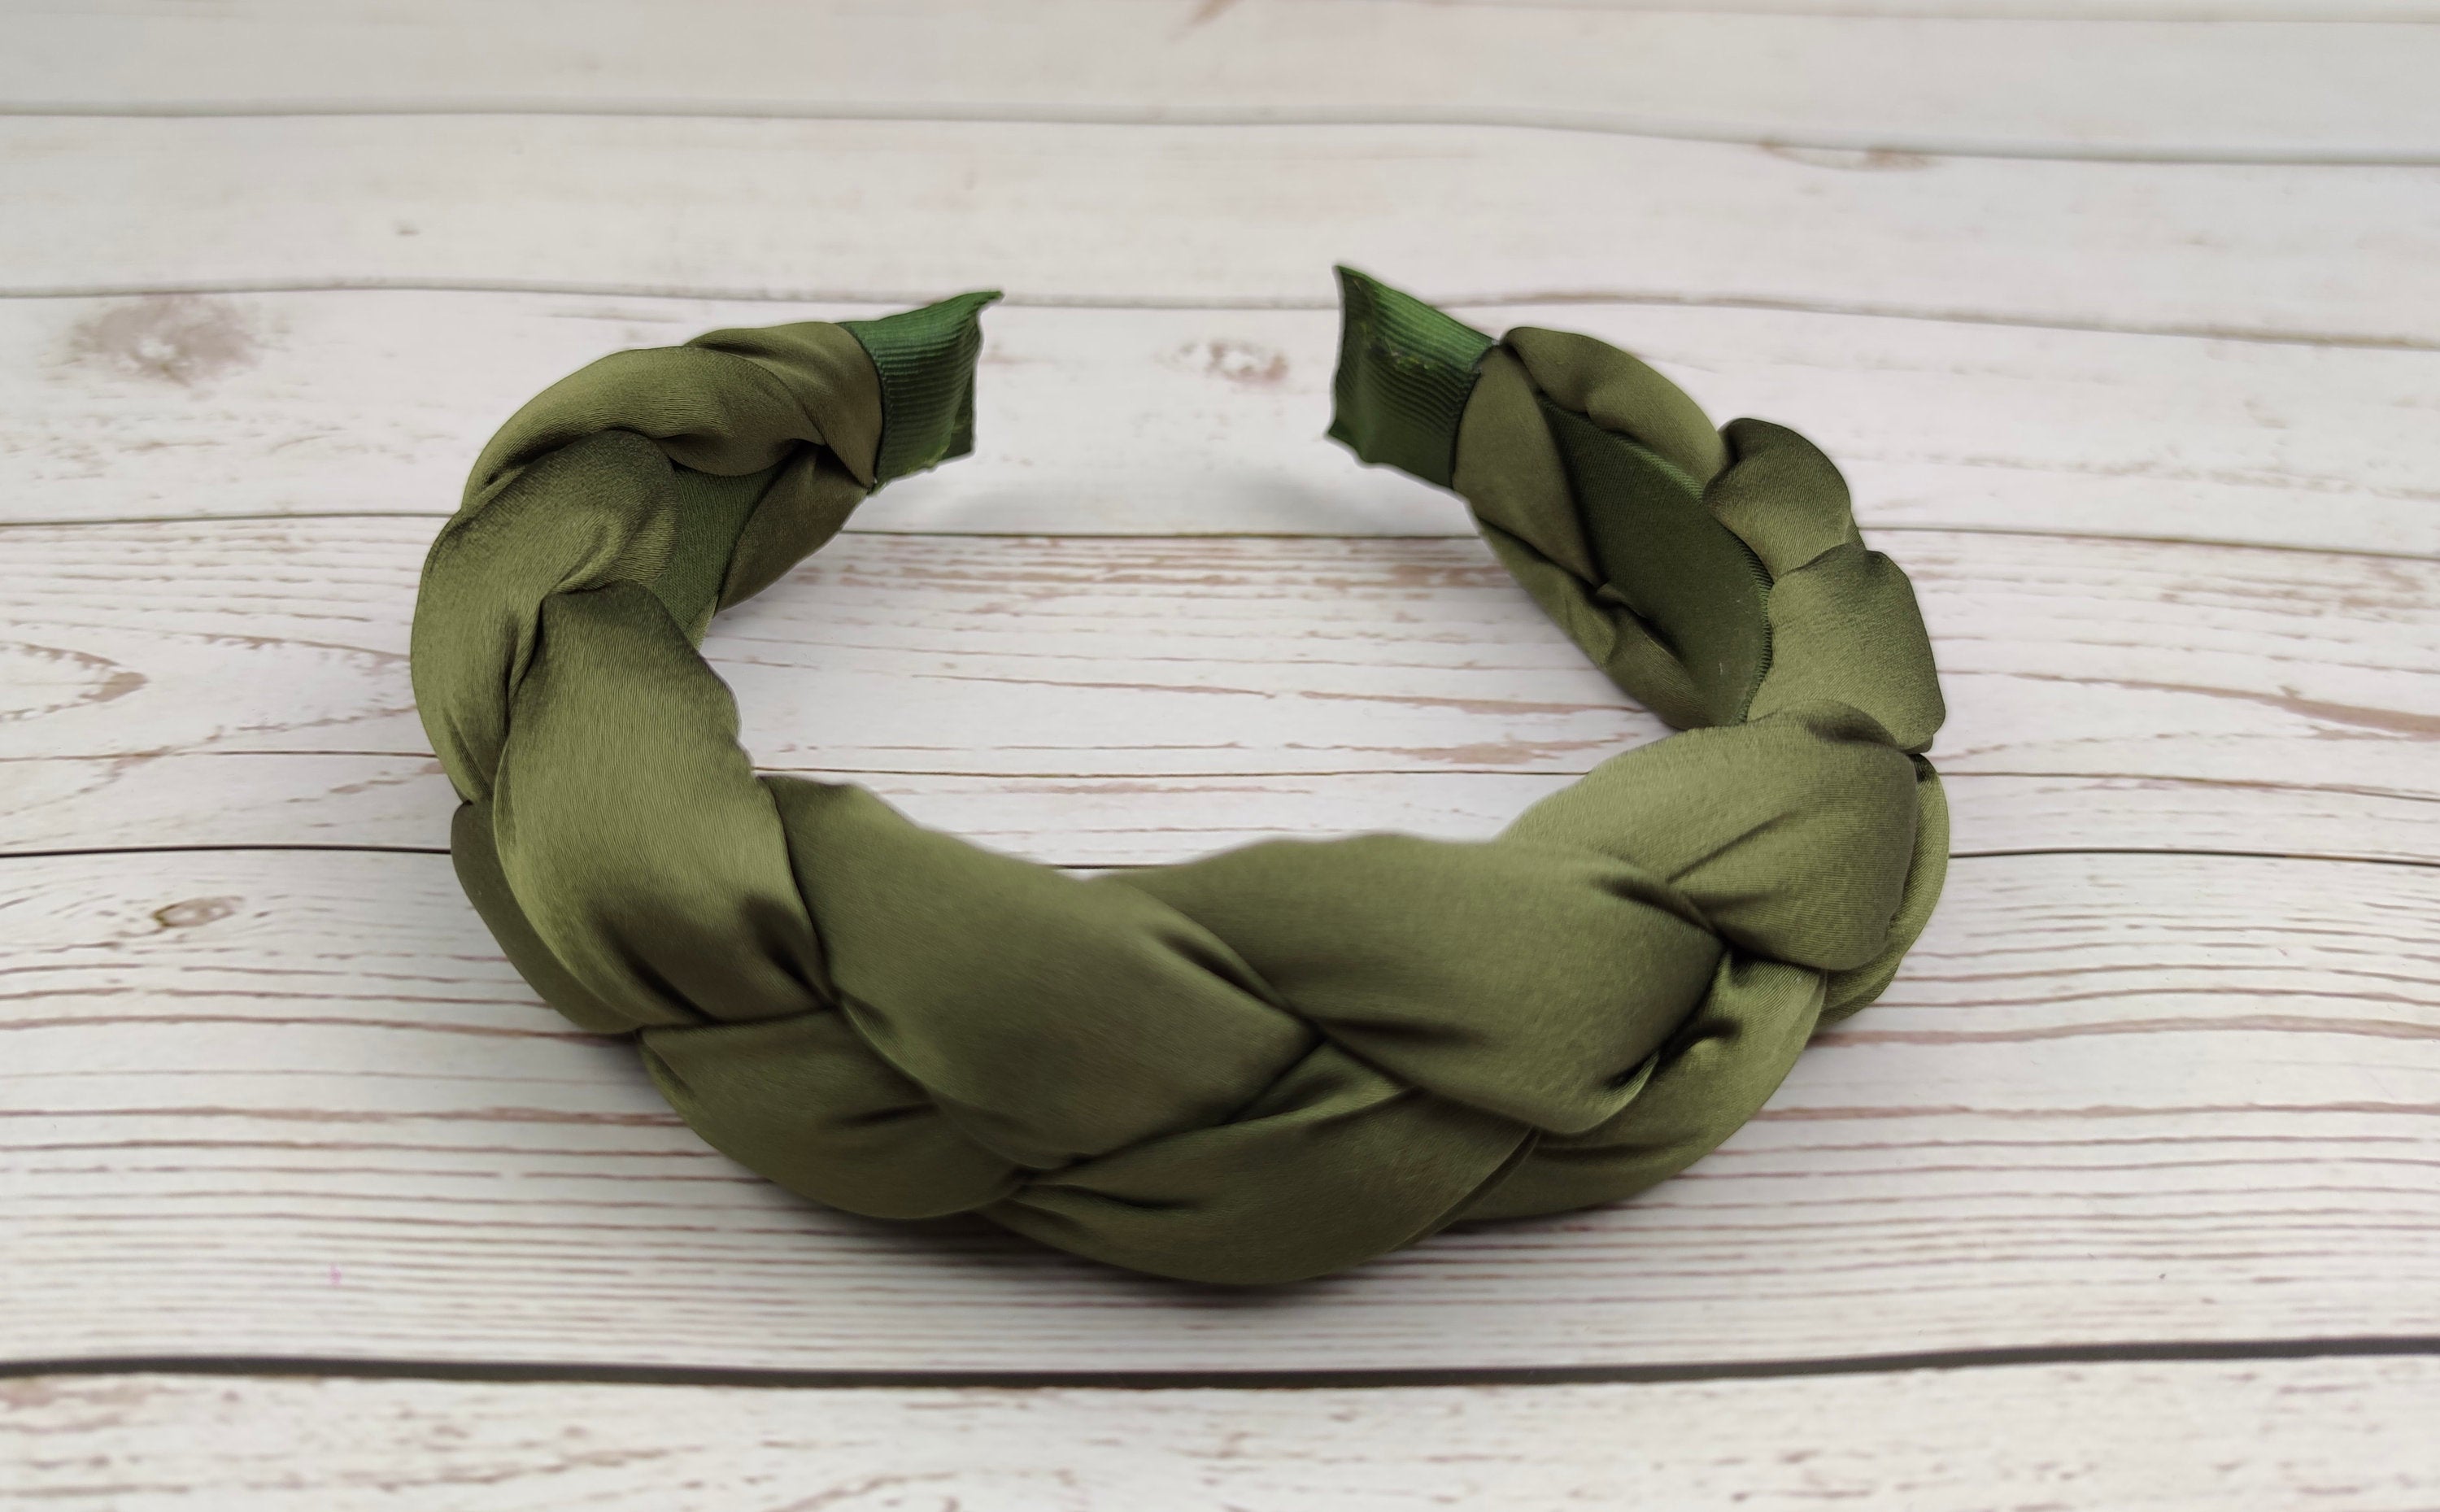 Stay on-trend with this stylish army green satin headband, featuring a chic knotted design for any occasion.